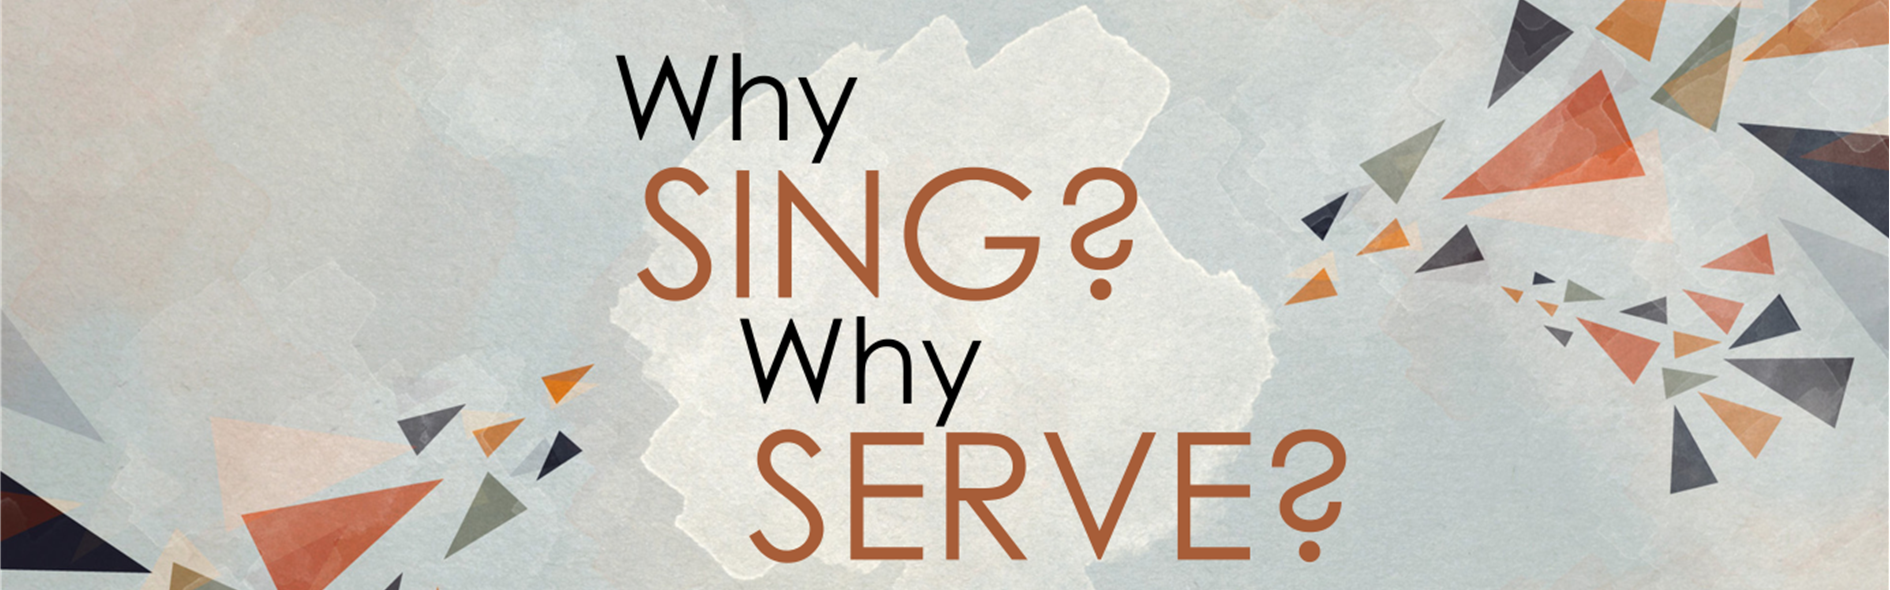 Why sing Why Serve-wide